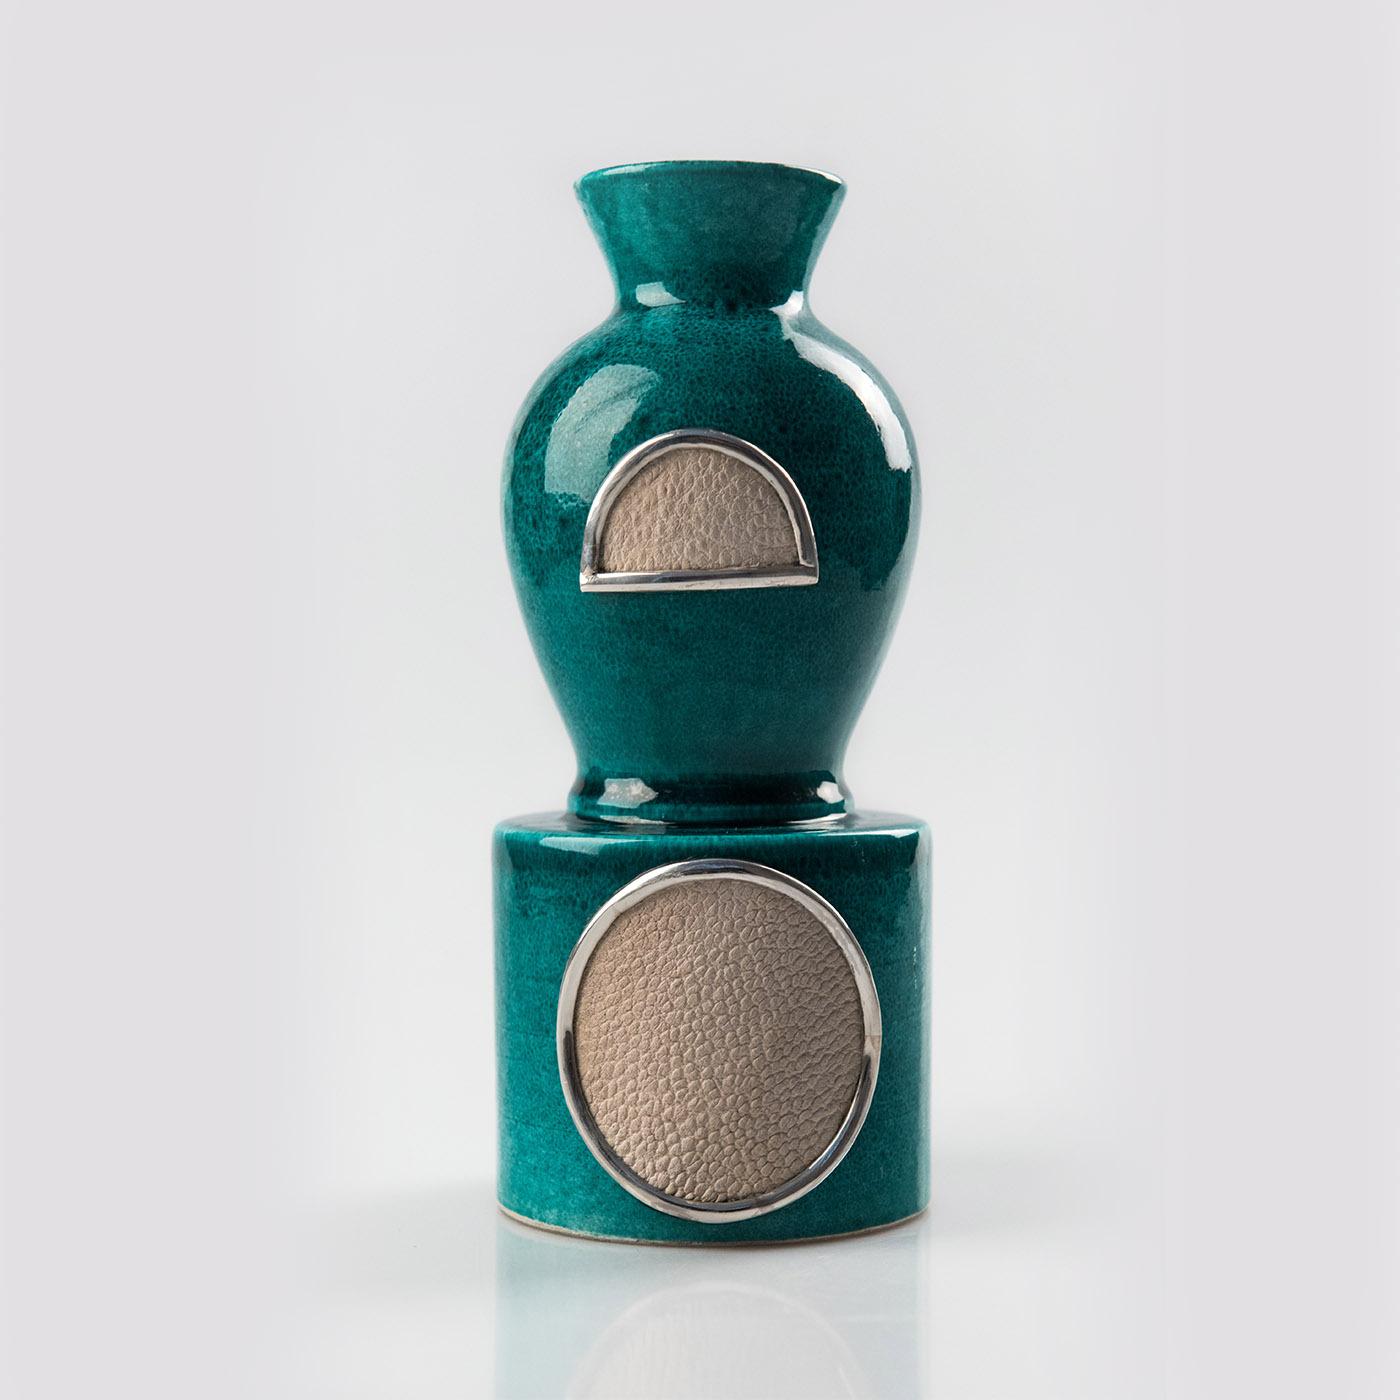 Inspired by chess pawns, this striking vase is a precious and refined object of interior design, a superb accent piece for a contemporary and elegant setting. Deftly handcrafted of ceramic, it is lacquered in a polished emerald-green shade, enhanced